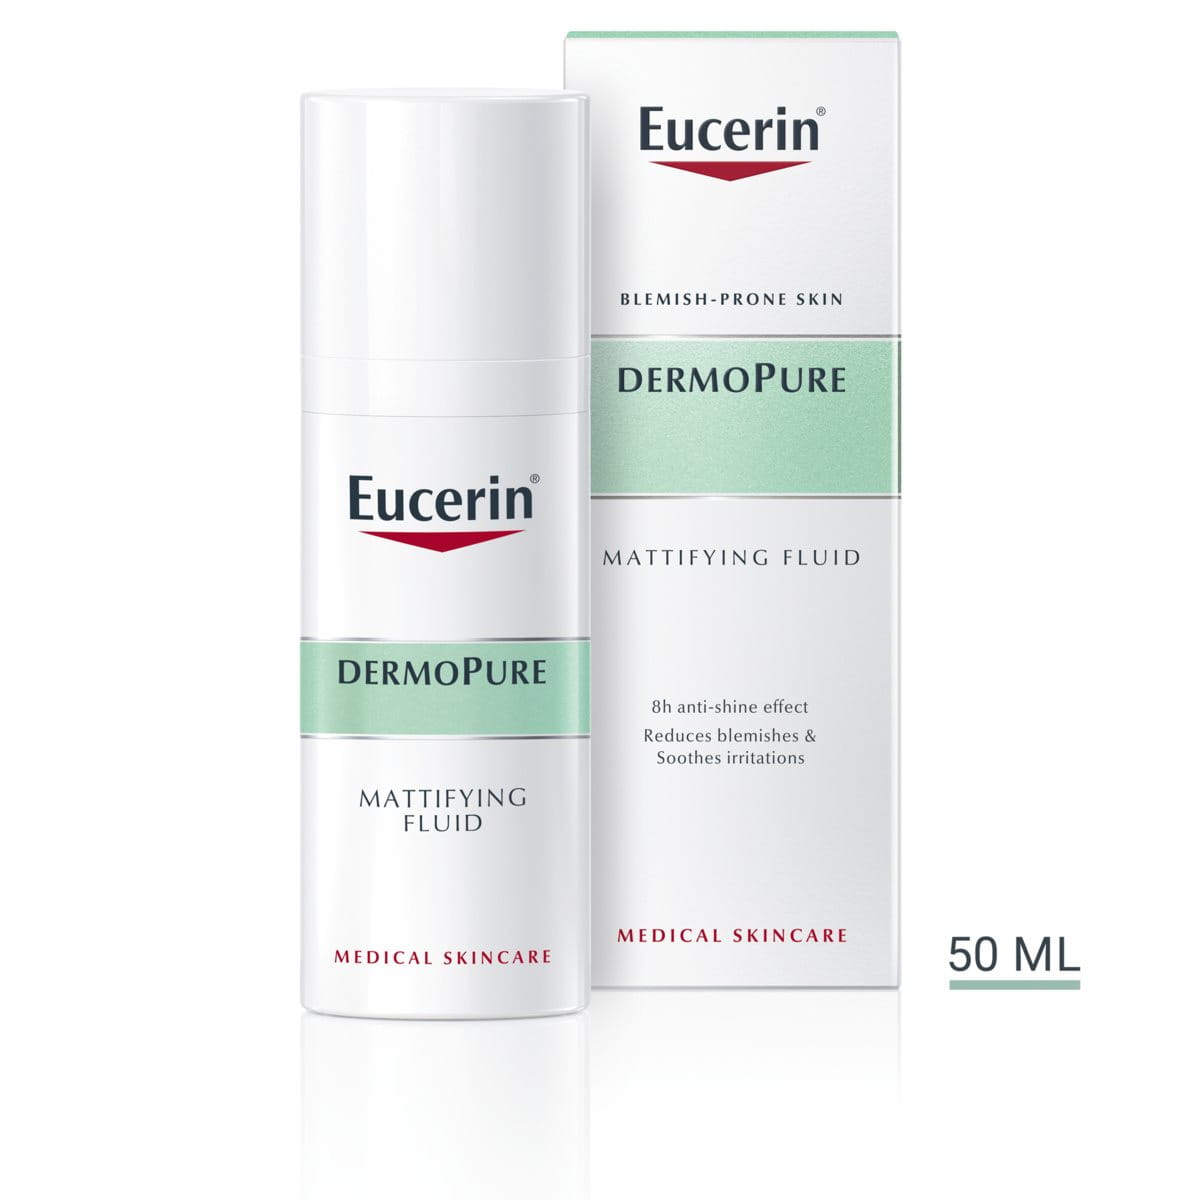 A mattifying fluid for acne-prone with an 8 hour anti-shine effect that helps reduce blemishes diminishes excess sebum